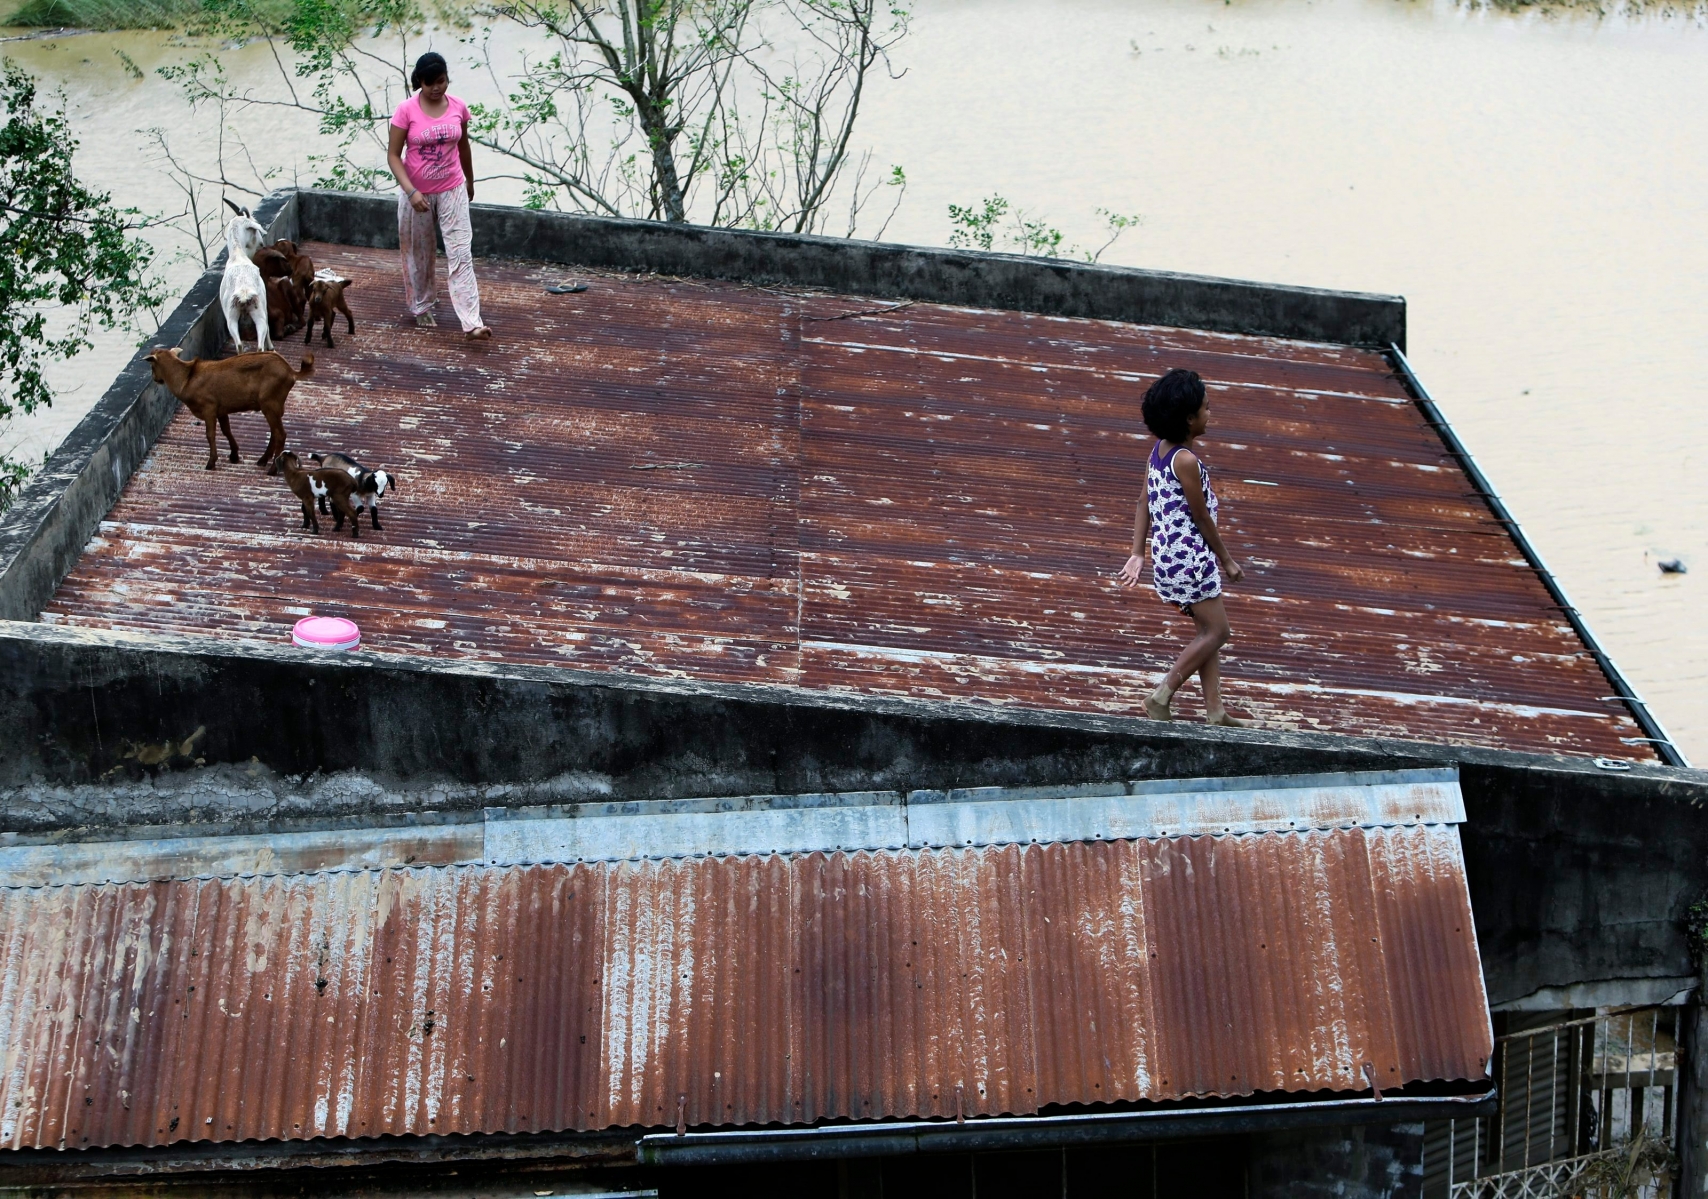 epa04984072 Filipinos caught in Typhoon Koppu forced to escape flood waters with their animals onto the roof of their home in Cabanatuan city, Nueva Ecija province, northern Manila, Philippines, 19 October 2015. Filipino emergency teams are attempting to reach victims stranded by flooding caused by Typhoon Koppu, and have begun clearing areas damaged by the storm which battered the north of the country. Soldiers, police officers and other emergency workers were dispatched to the northern province of Nueva Ecija, a rice-growing province where floodwaters reached up to rooftops in some places. 11 people have so far died and over 650'000 forced to evacuate their homes.  EPA/FRANCIS R. MALASIG PHILIPPINES TYPHOON KOPPU AFTERMATH